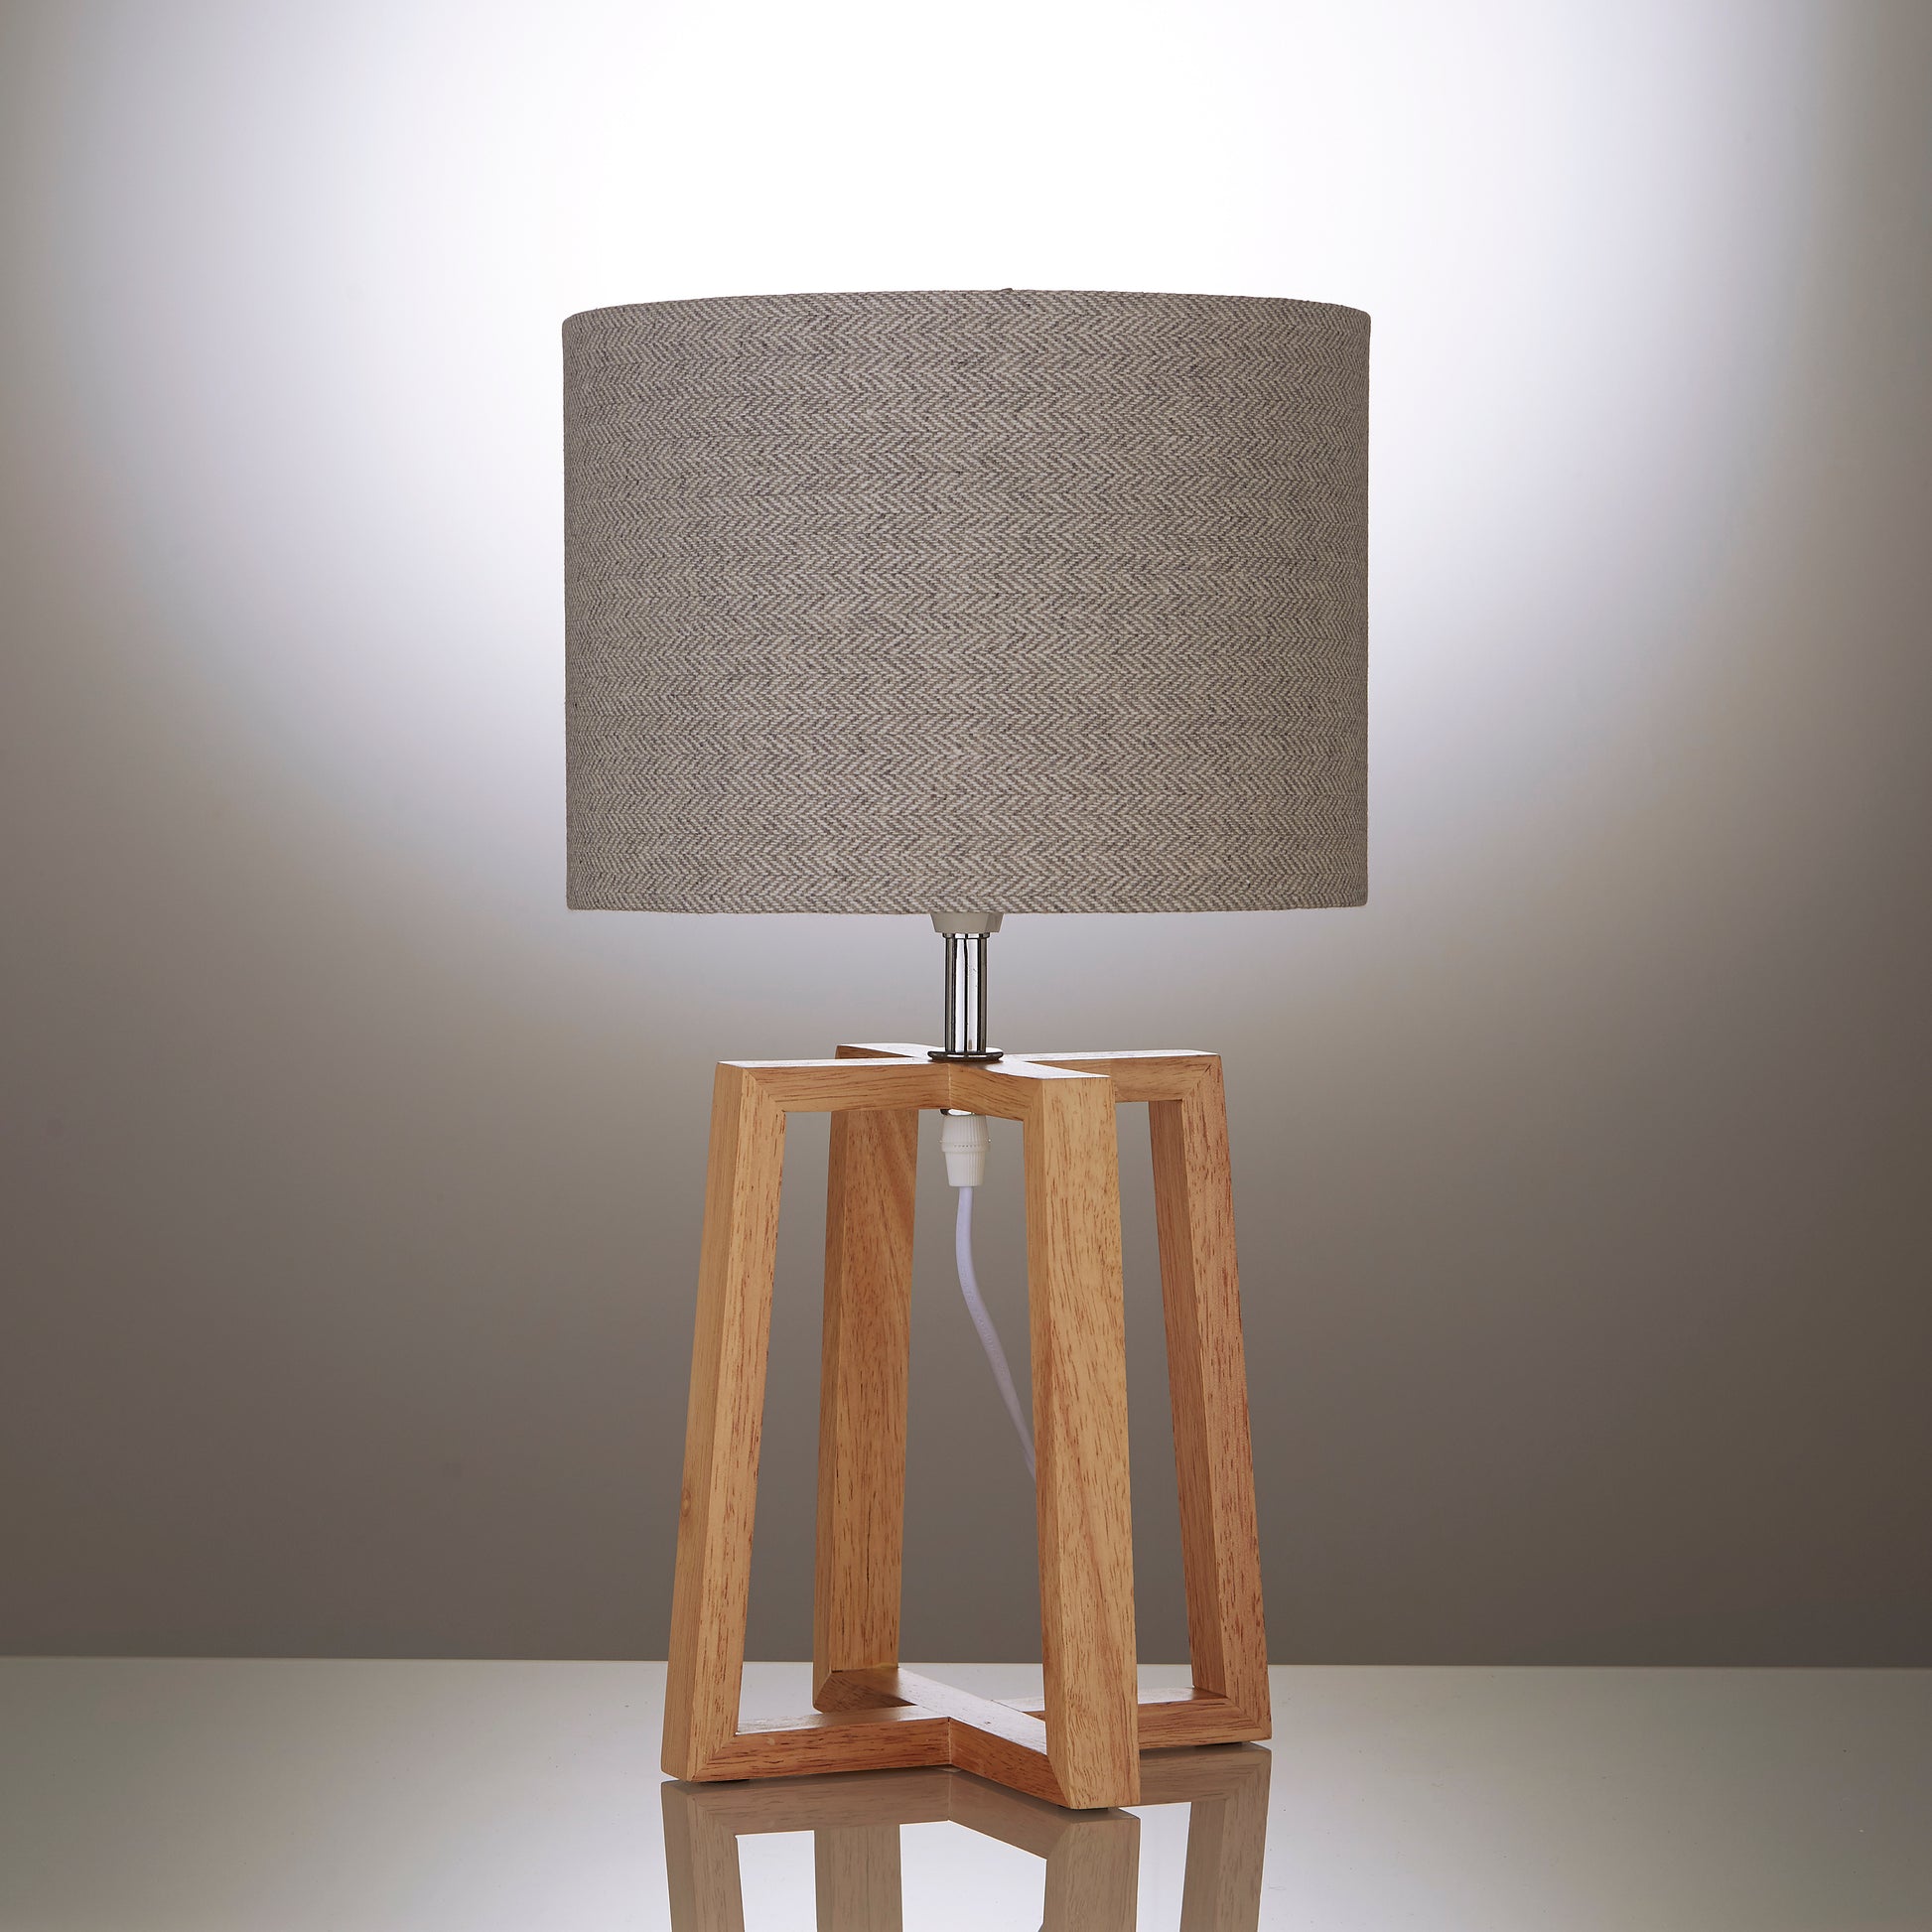 Pair of Natural Wooden Table Lamps with Linen Look Shades Criss Cross Legs